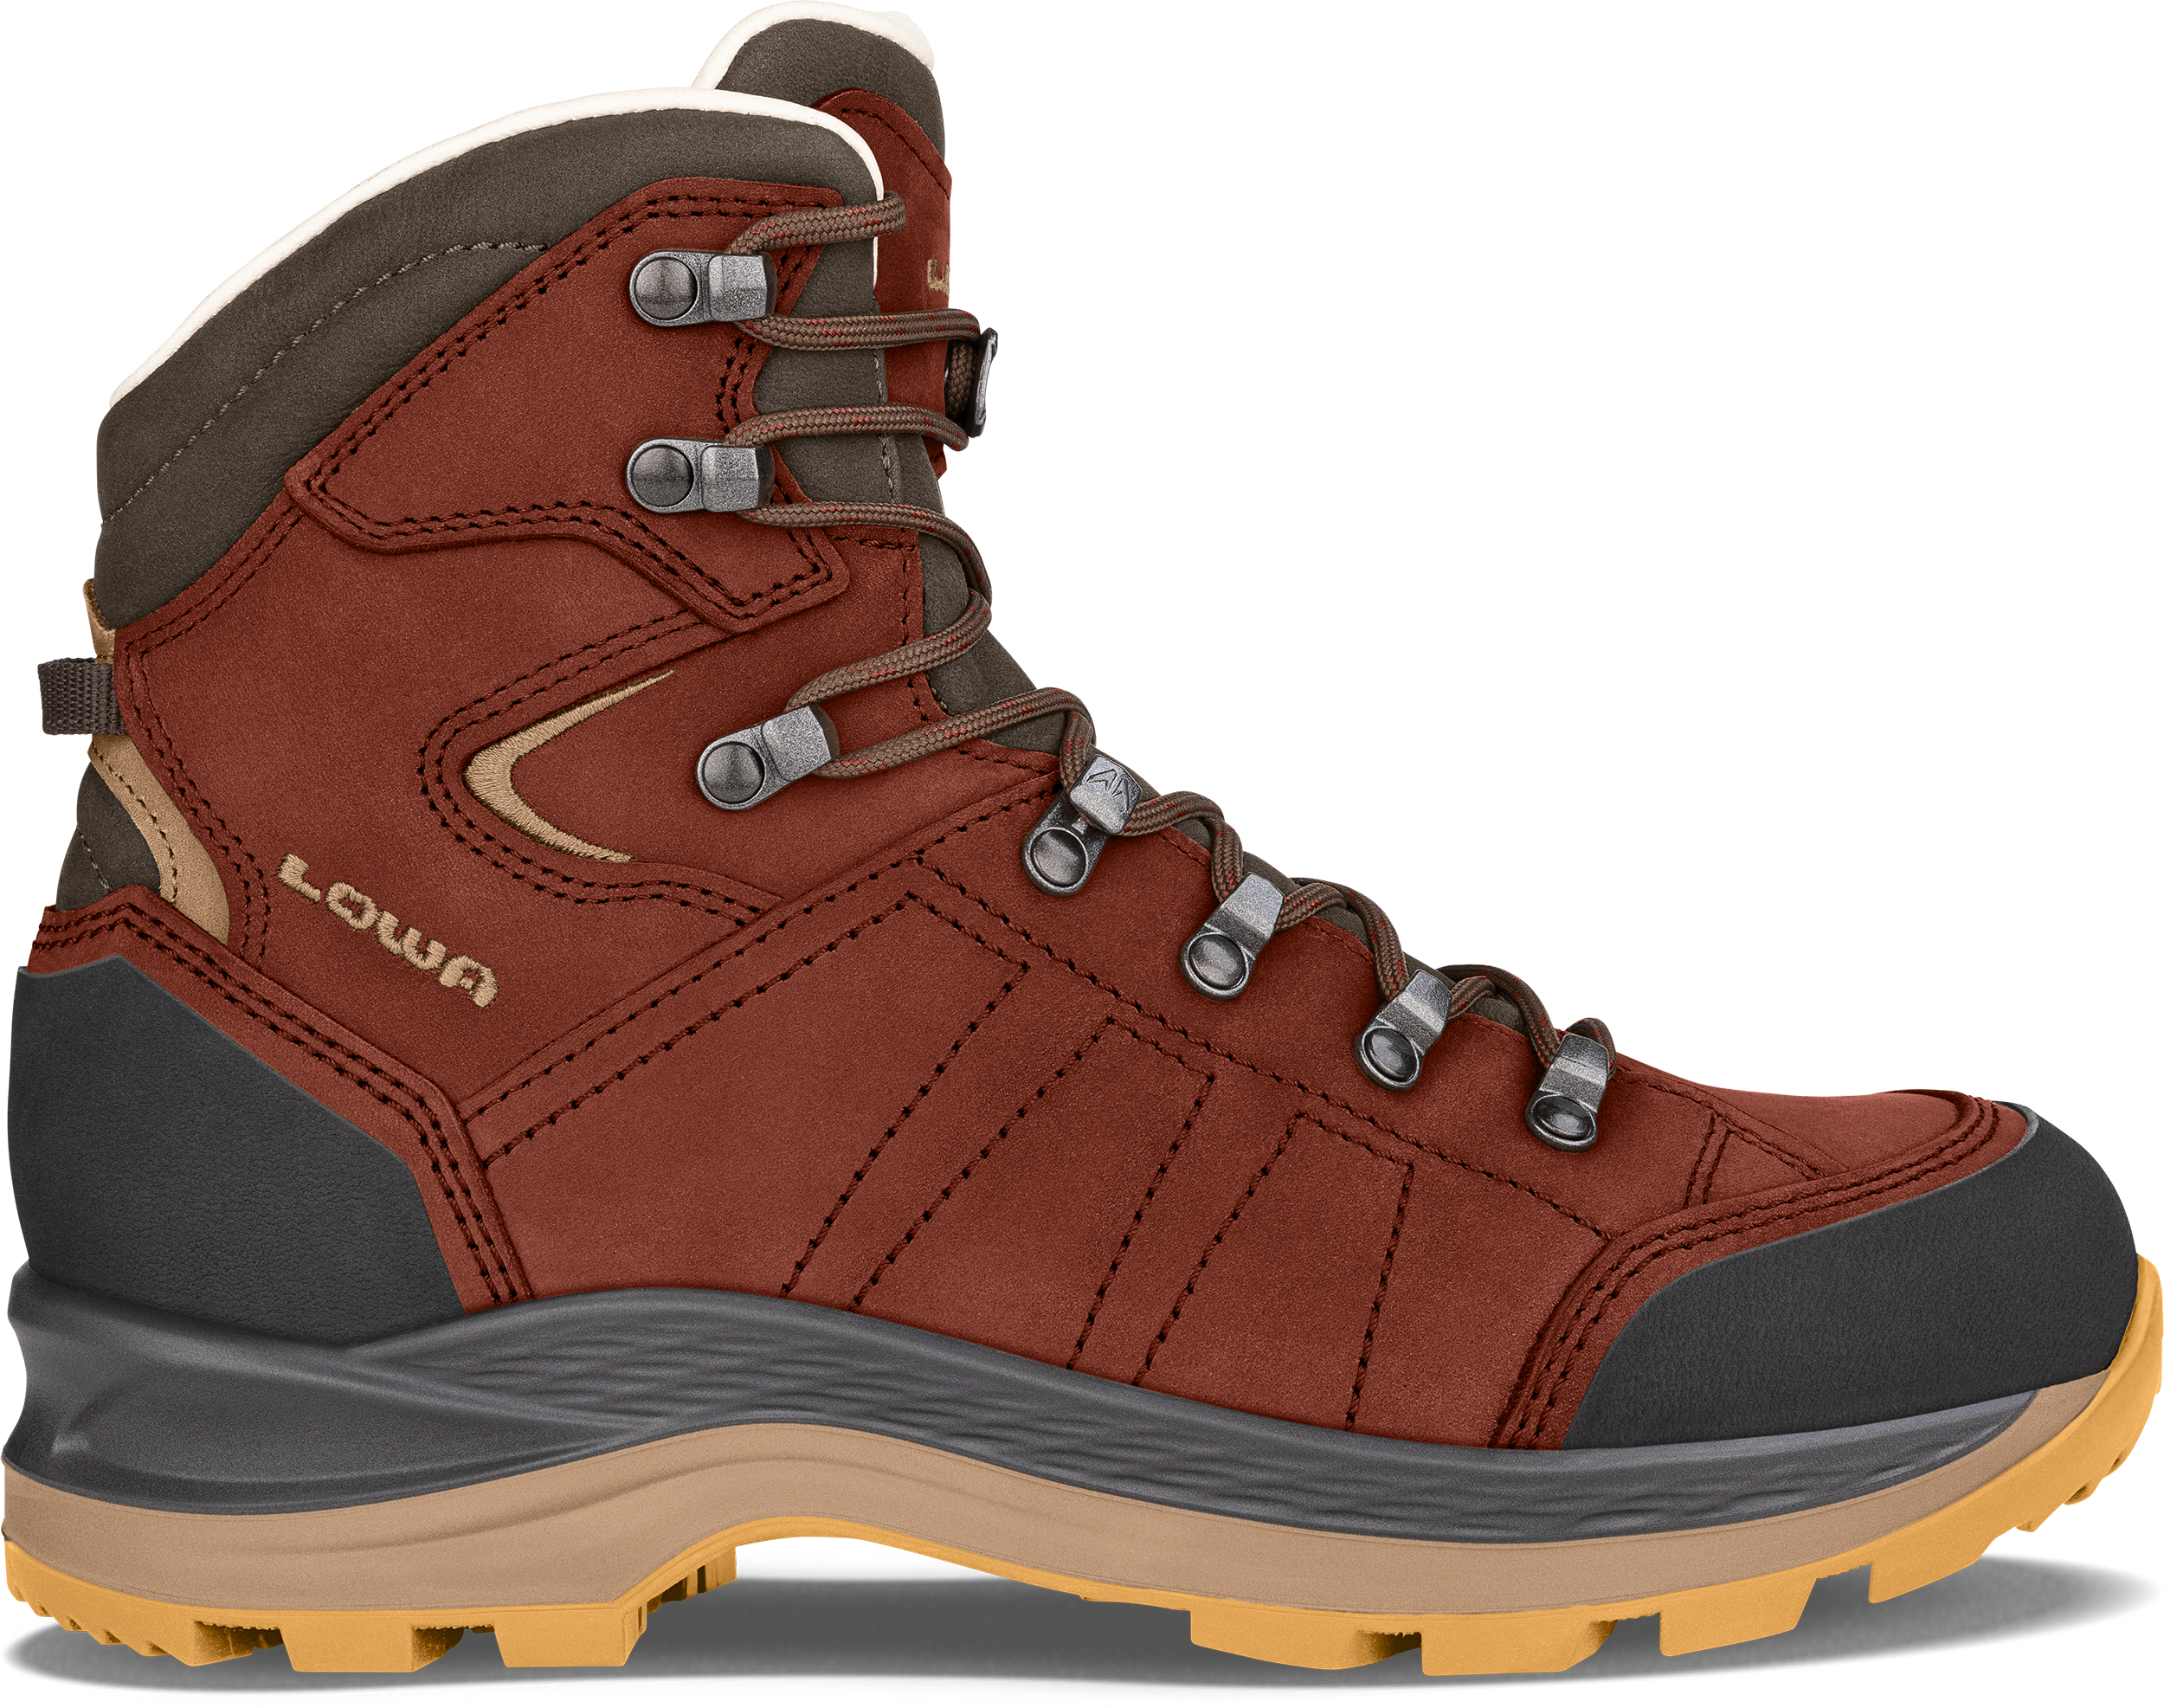 Highest quality and best comfort: TREKKING shoes. LOWA INT